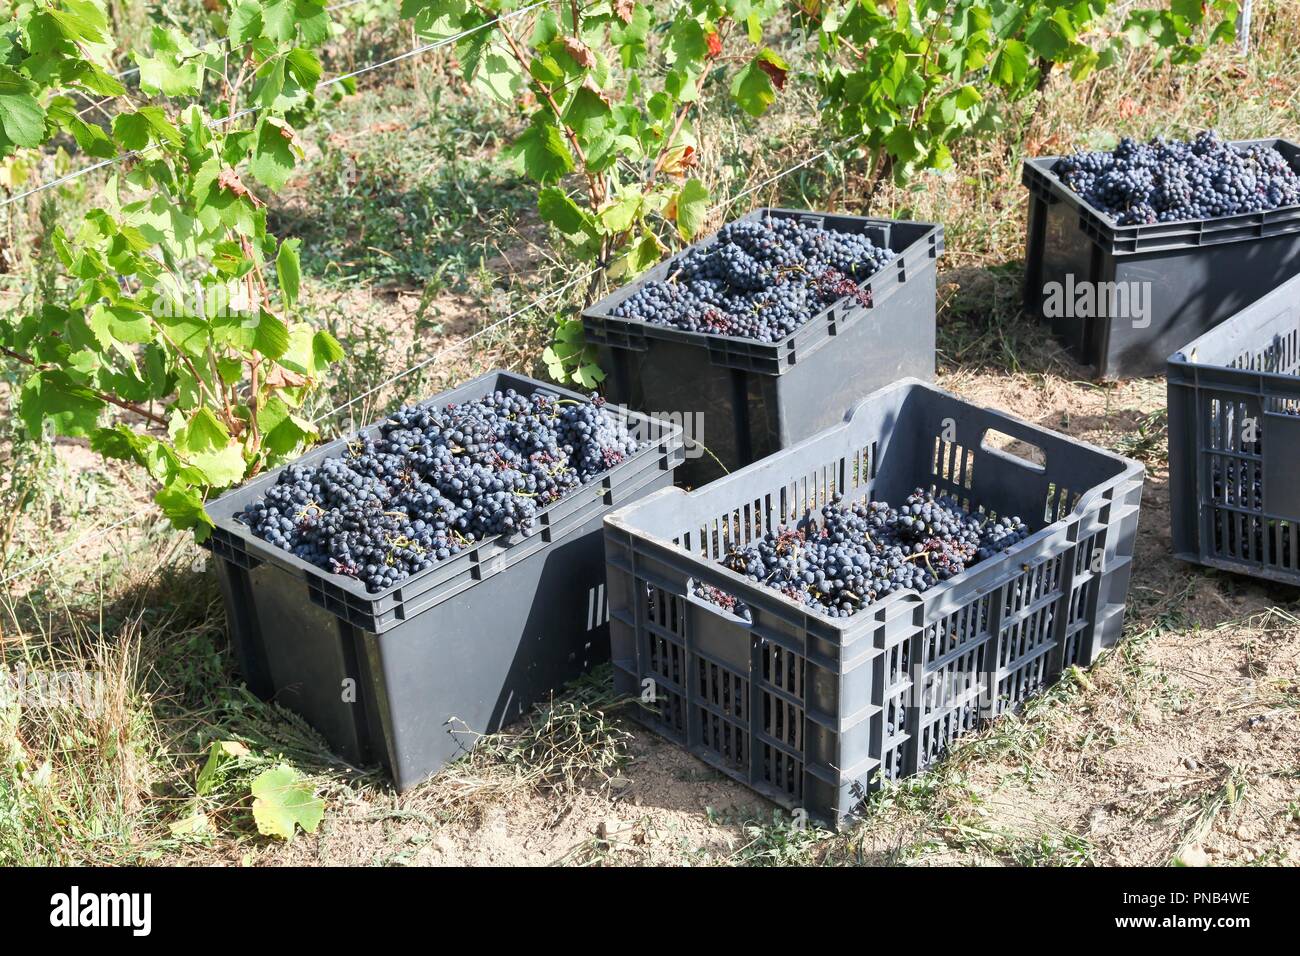 Harvesting of wine grapes in Beaujolais, France Stock Photo